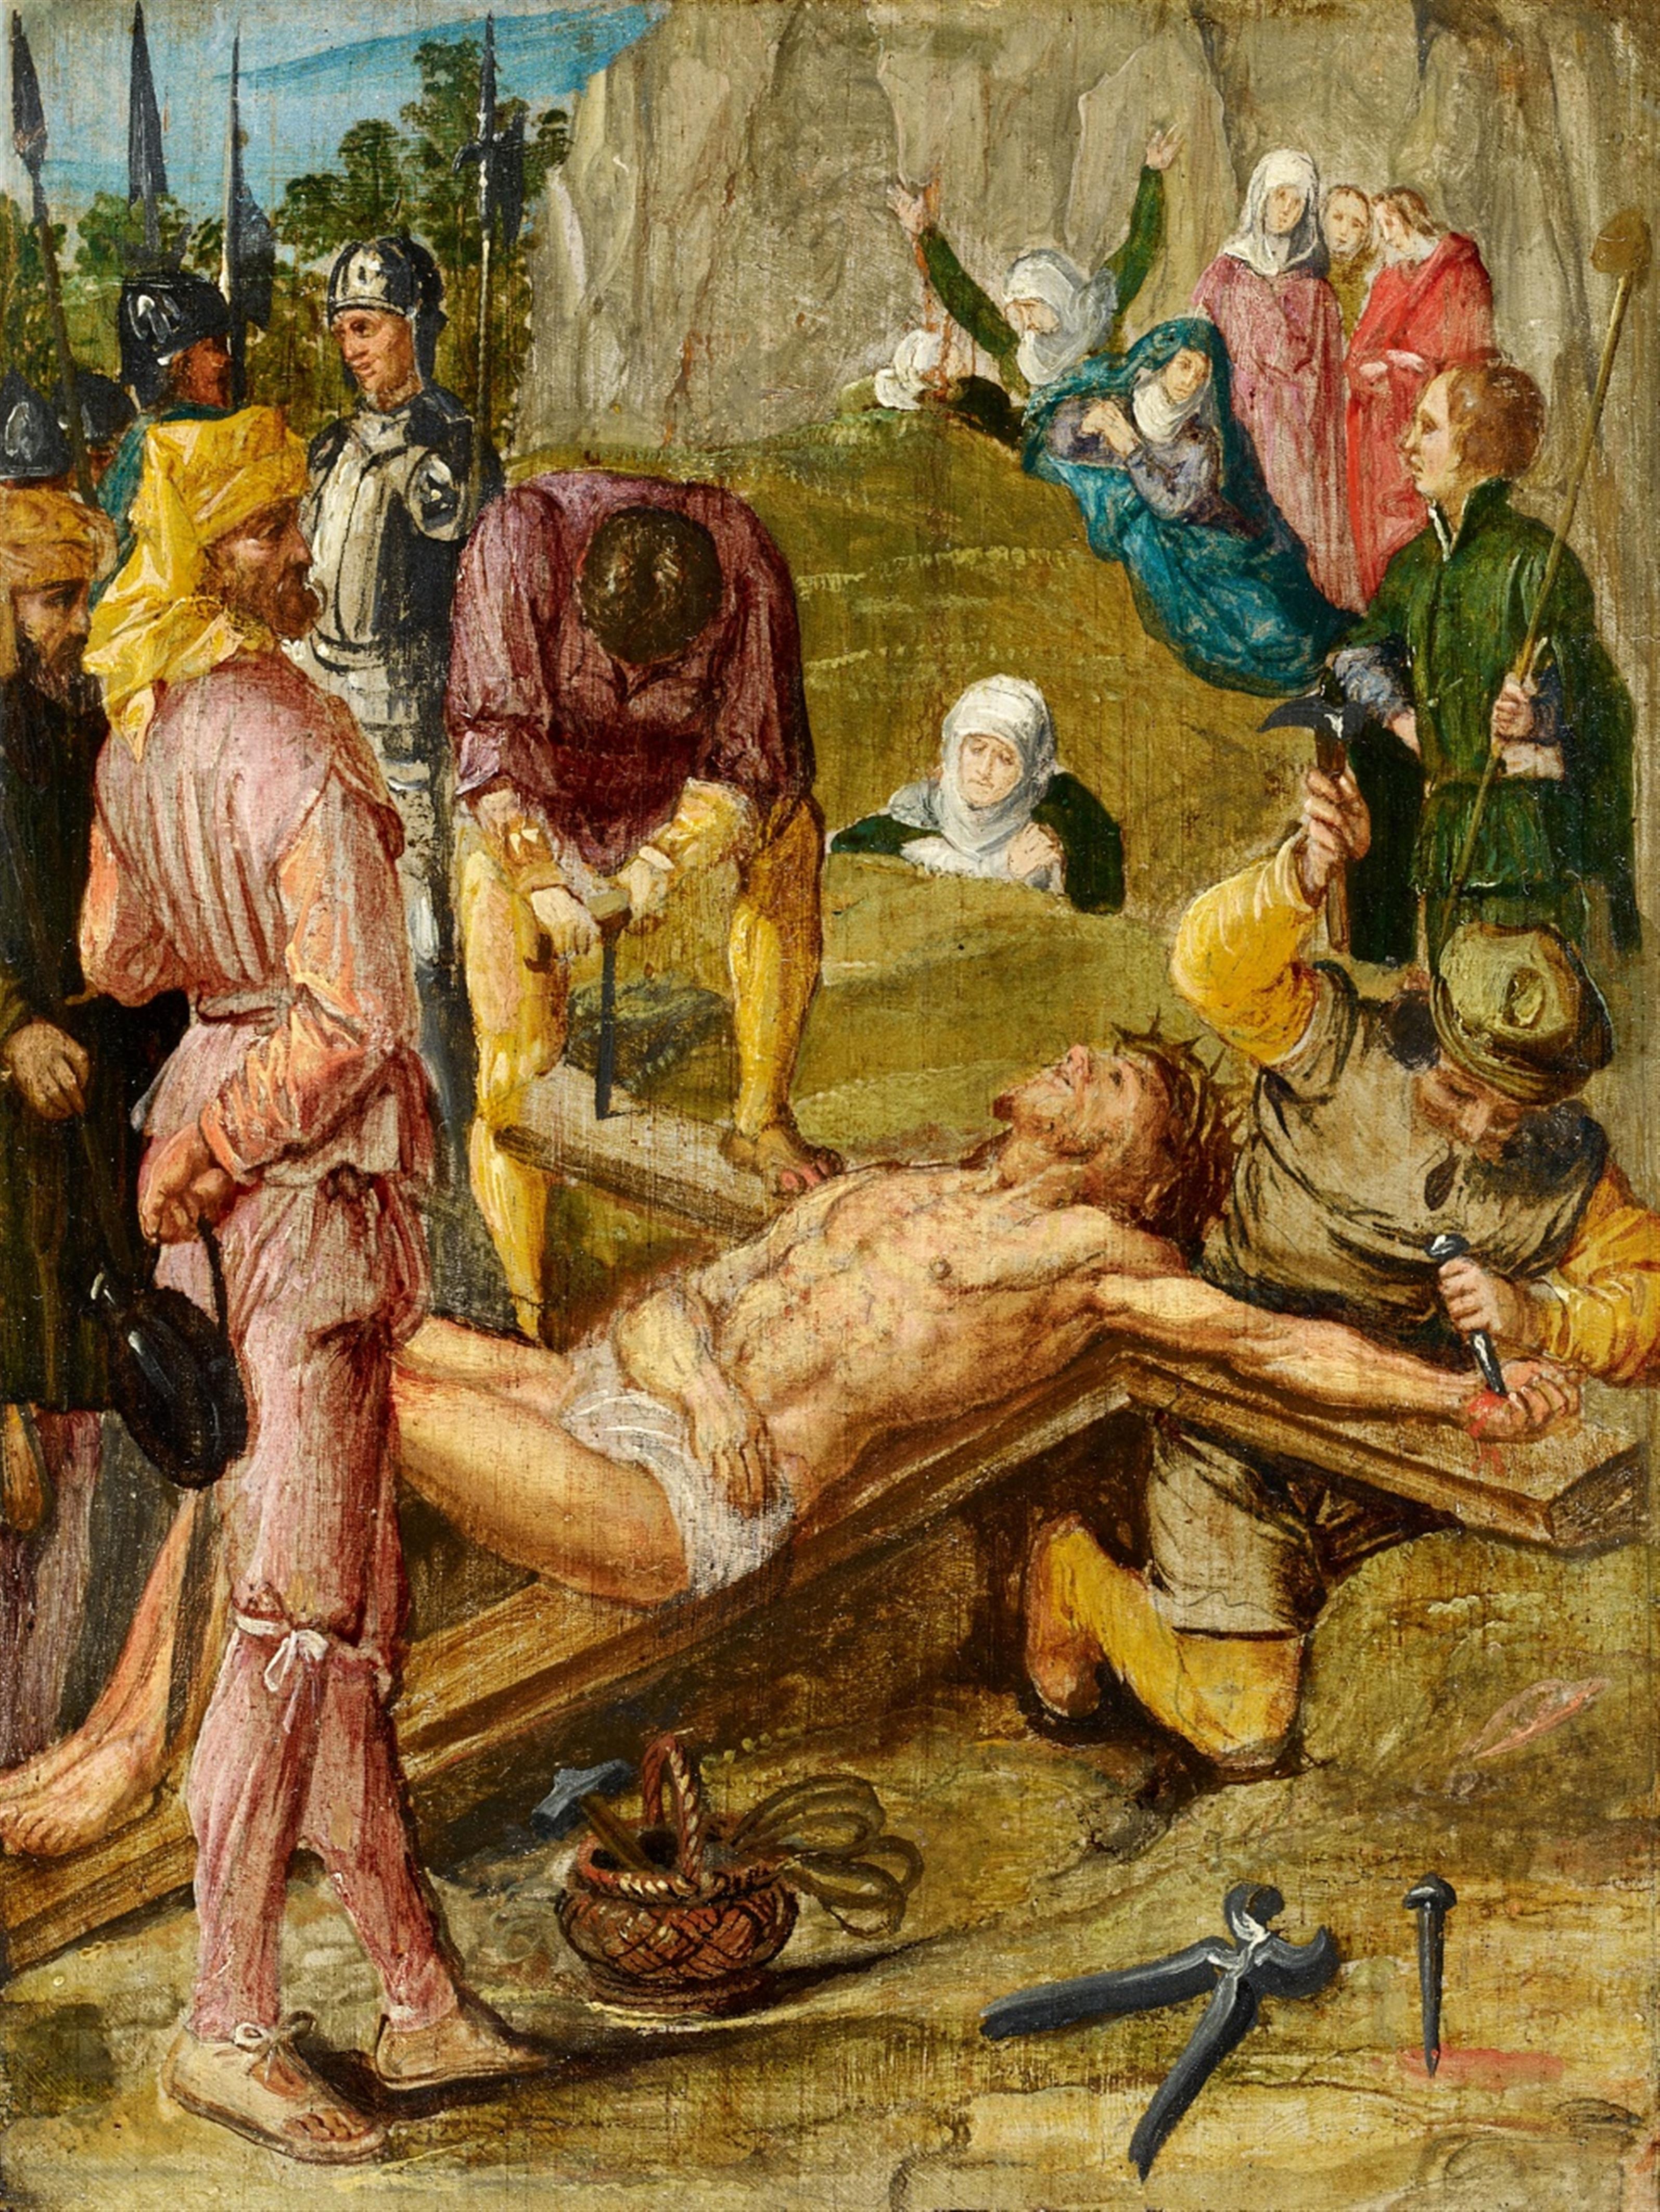 Jacob Pynas, attributed to - The Nailing of Christ to the Cross The Crucifixion - image-1